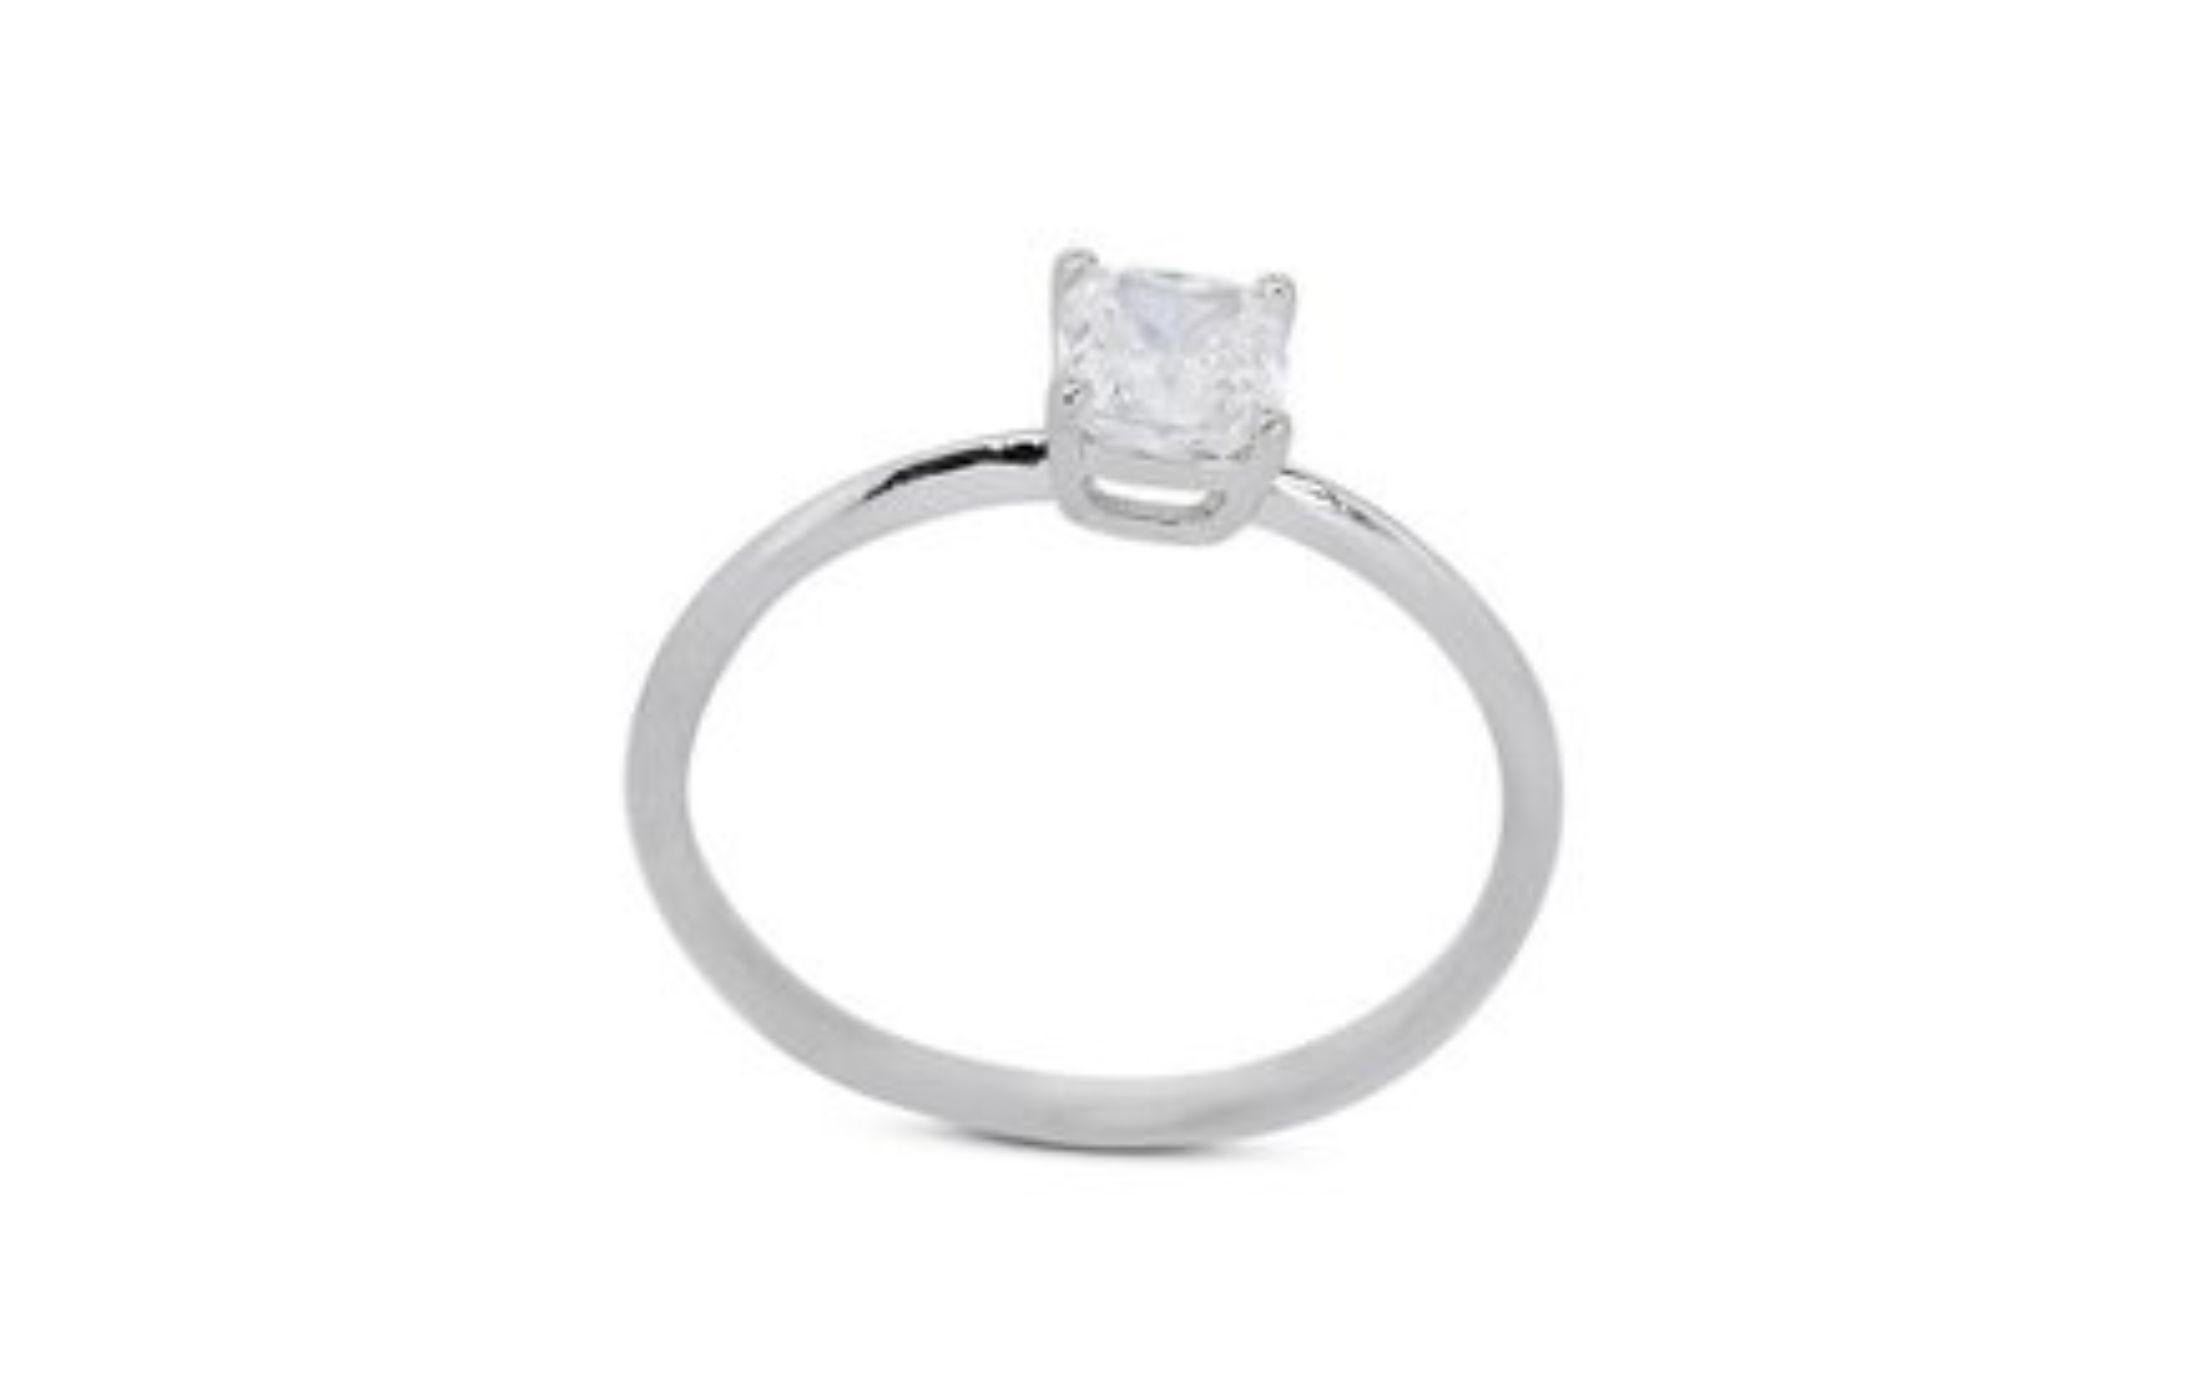 Dazzling 1.52 Carat Cushion Modified Diamond Ring in 18K White Gold For Sale 3